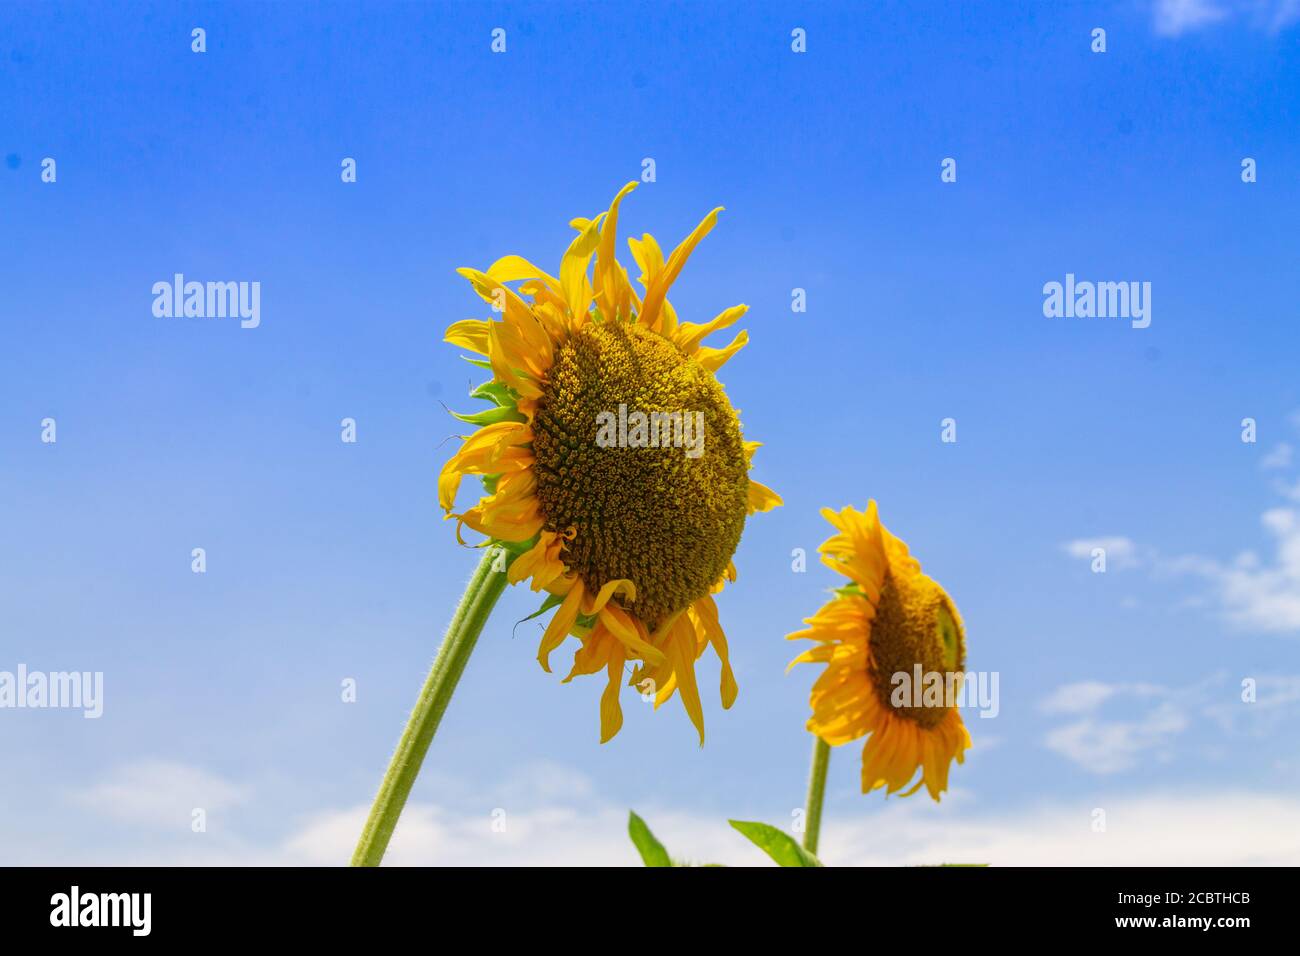 Sunflower field at clear blue sky Stock Photo